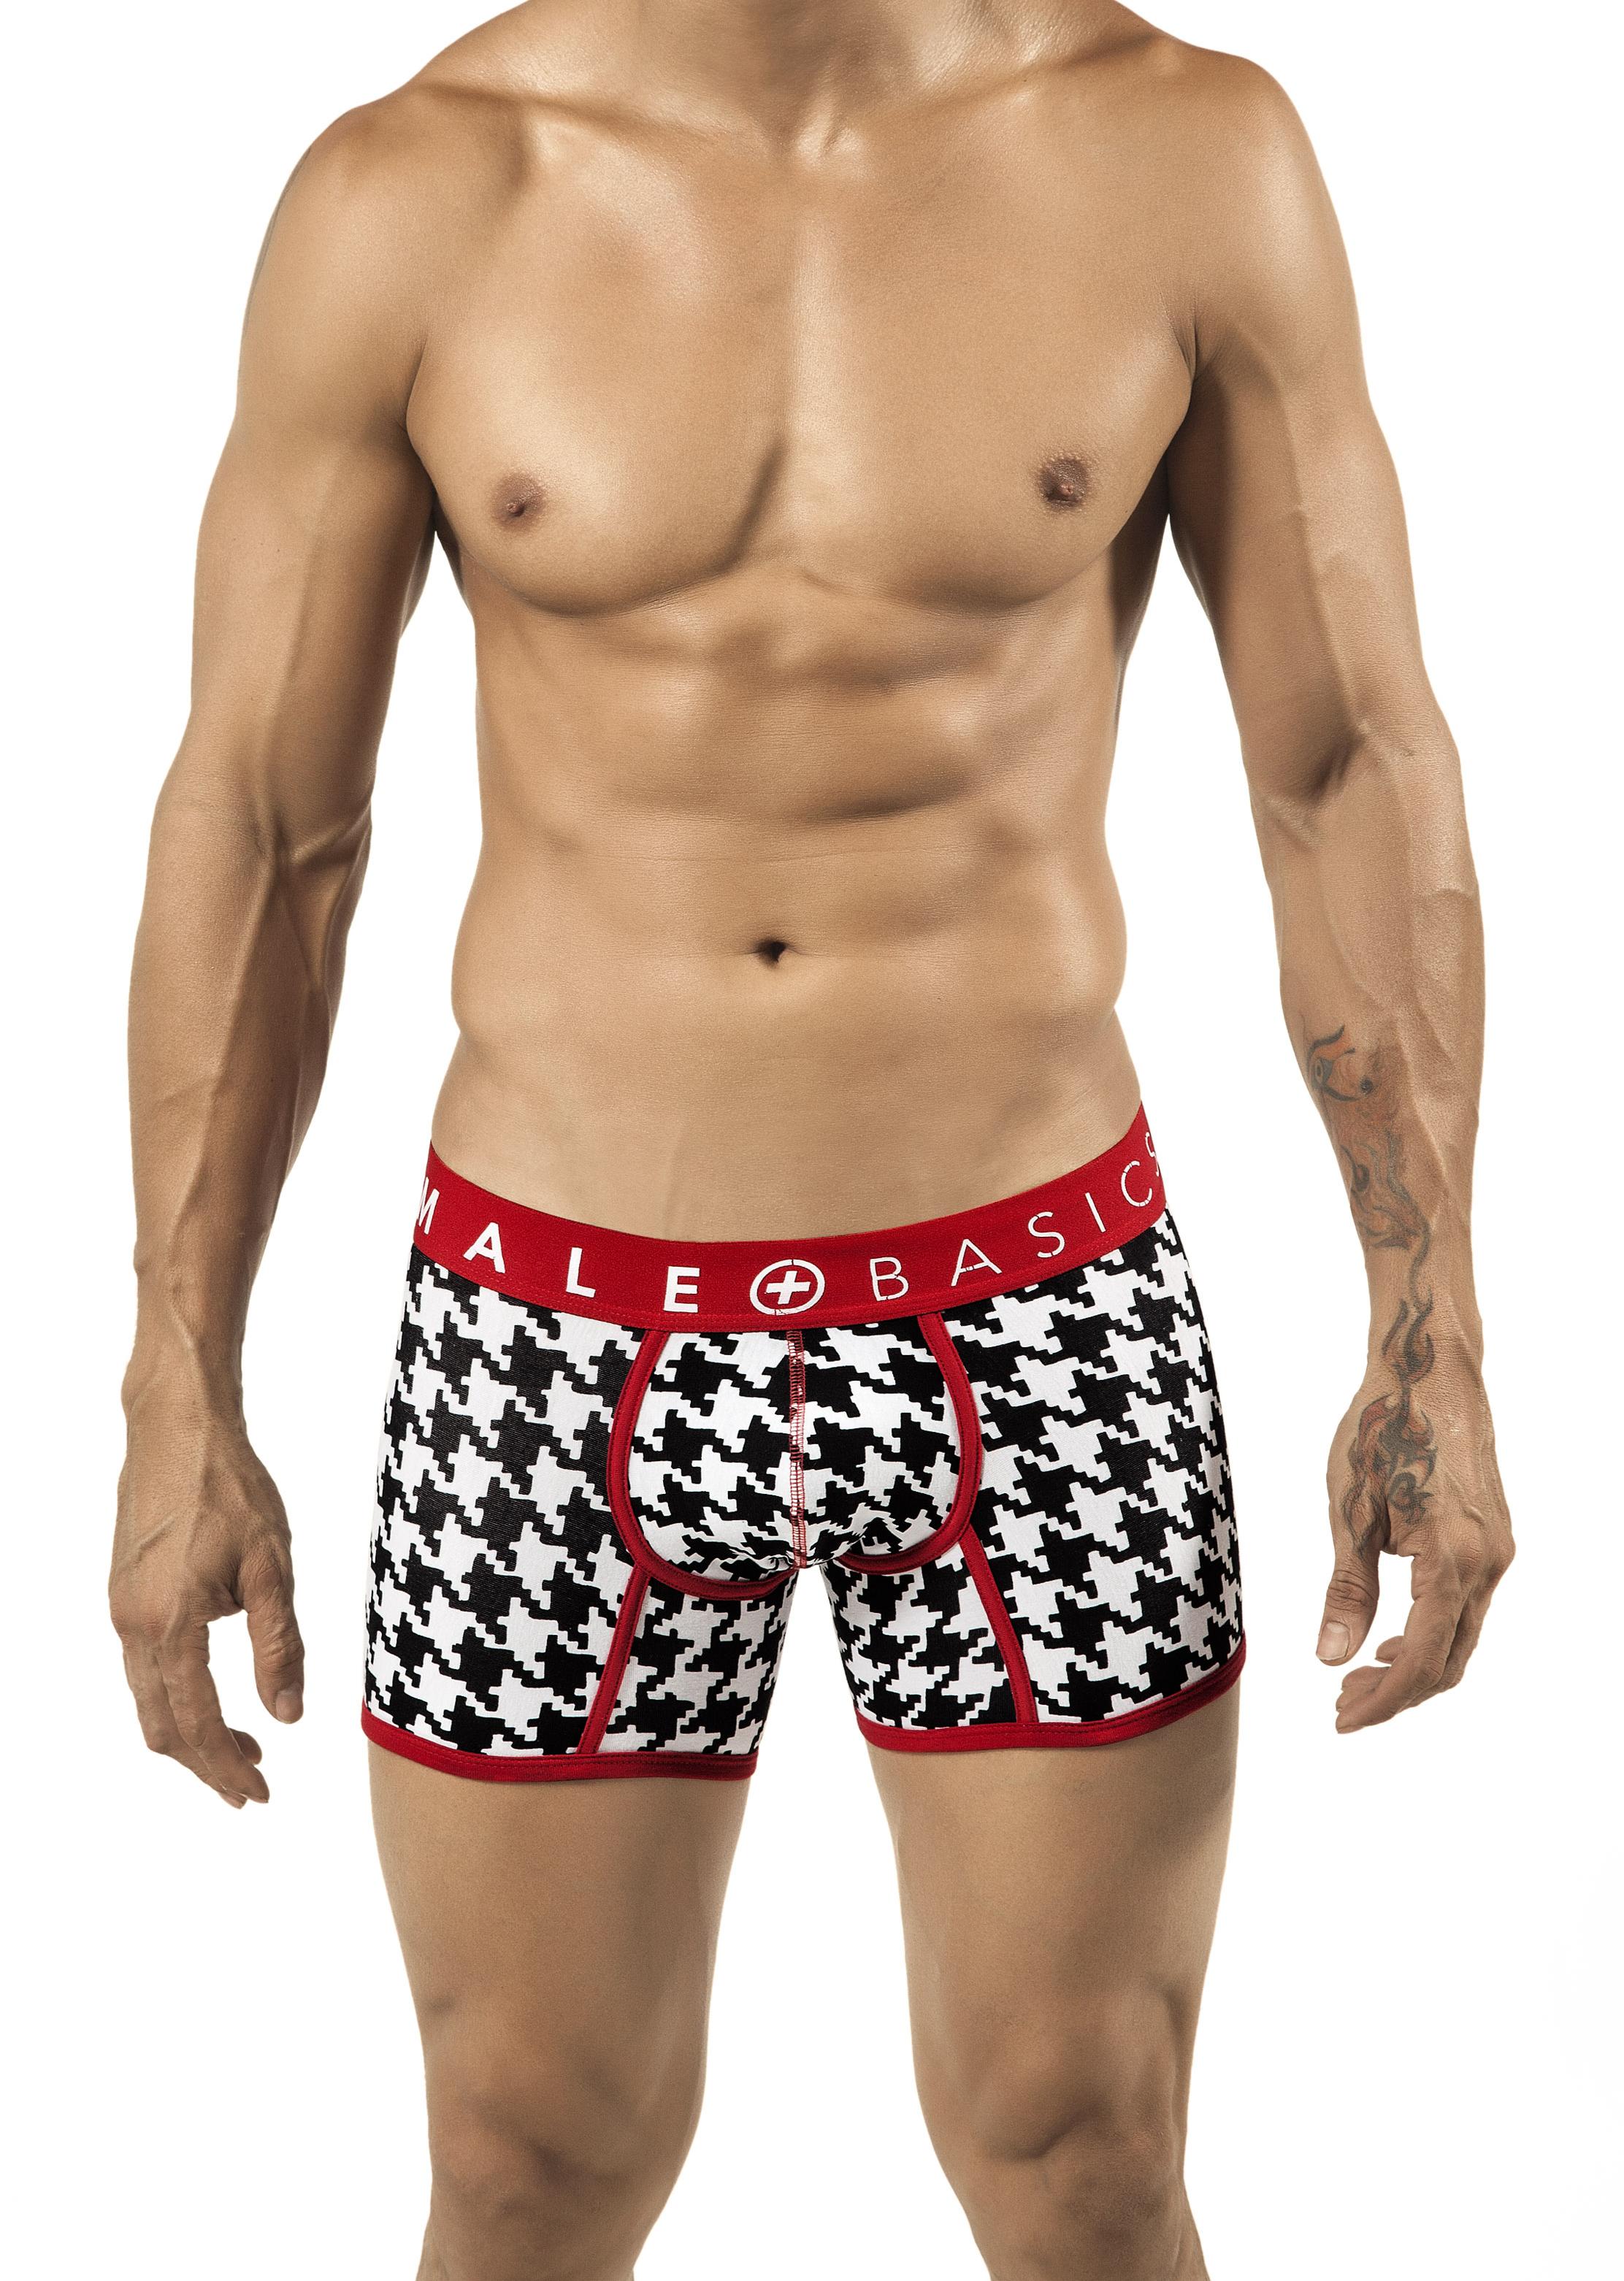 Houndstooth boxer briefs red waistband and stitching 5504 Edmonton